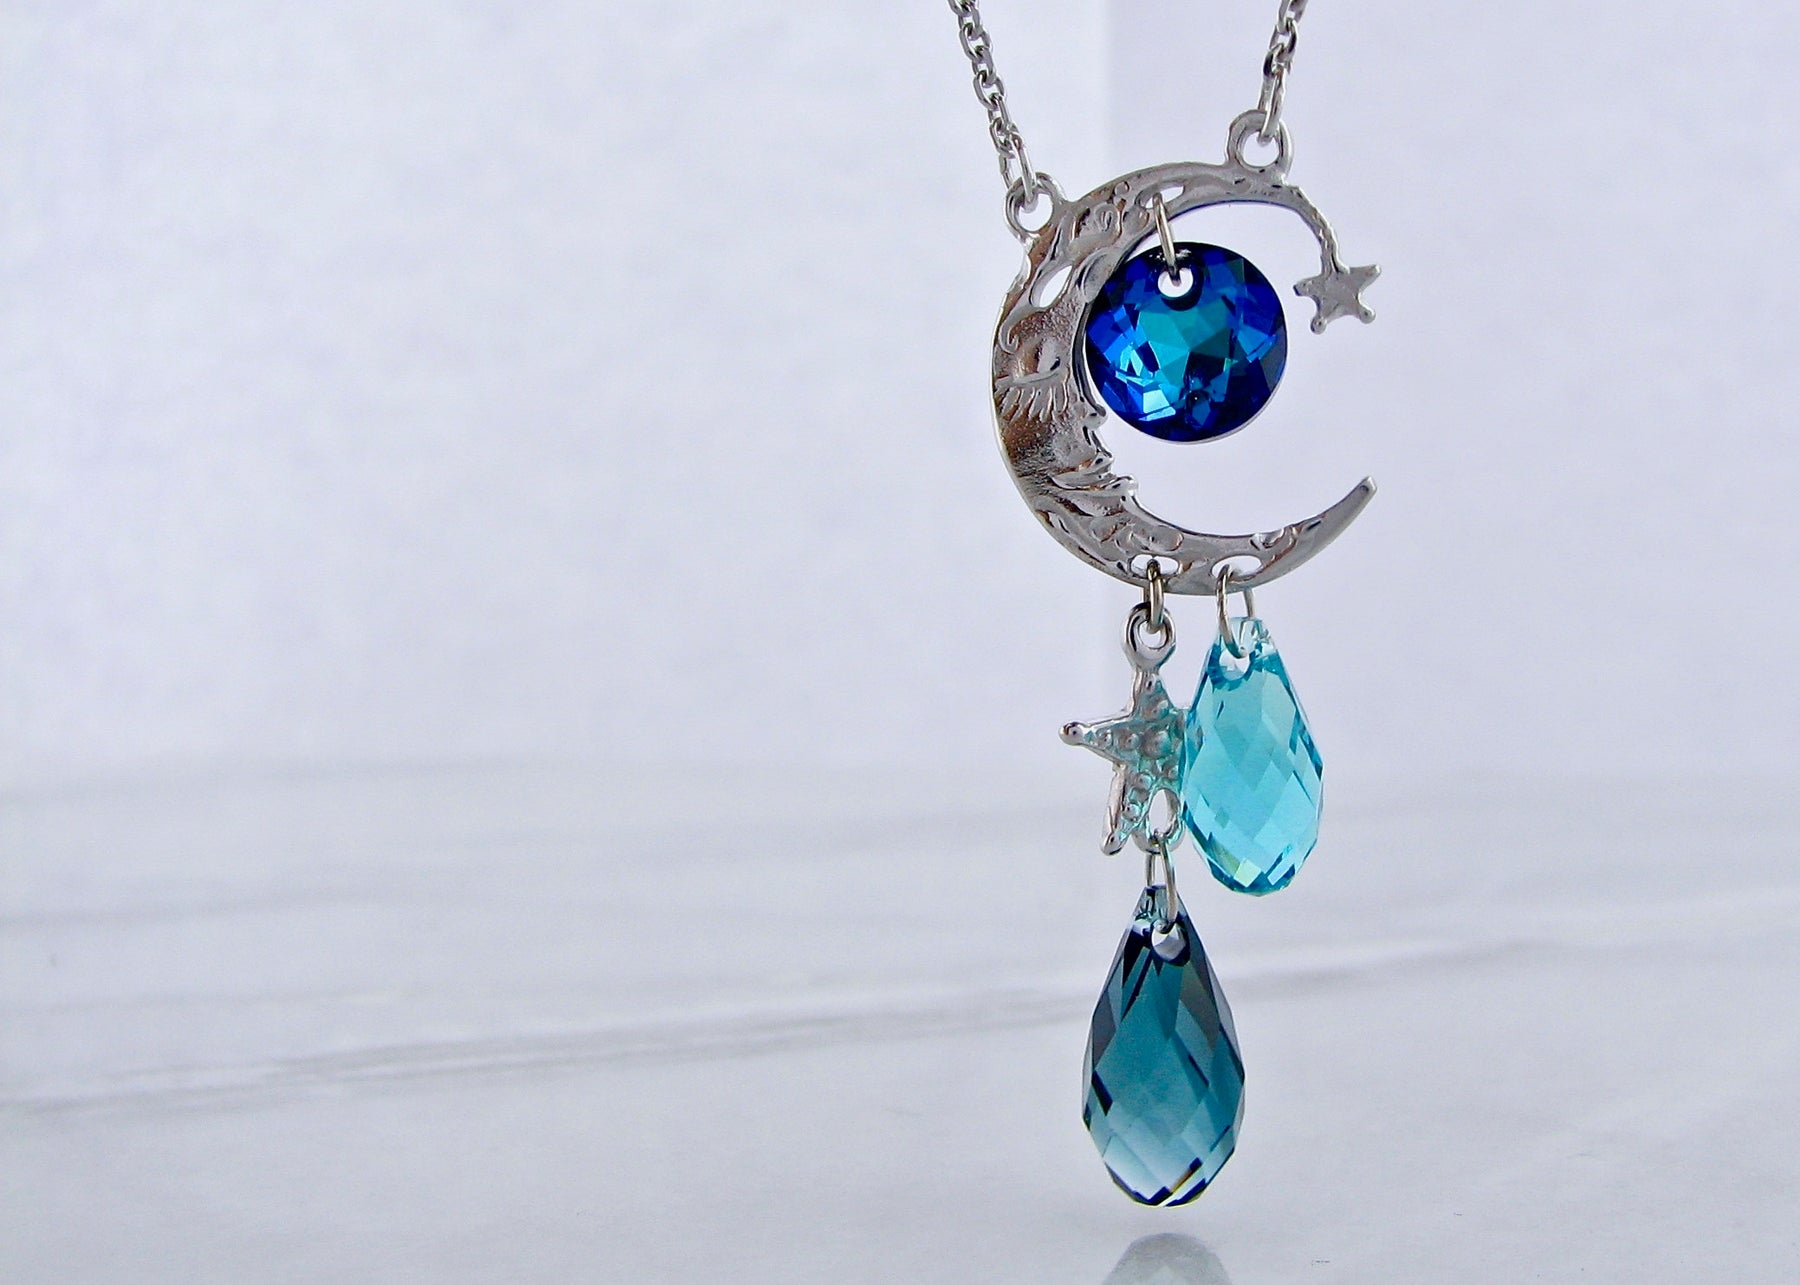 Once in a Blue Moon $5 Necklace Paparazzi Accessories